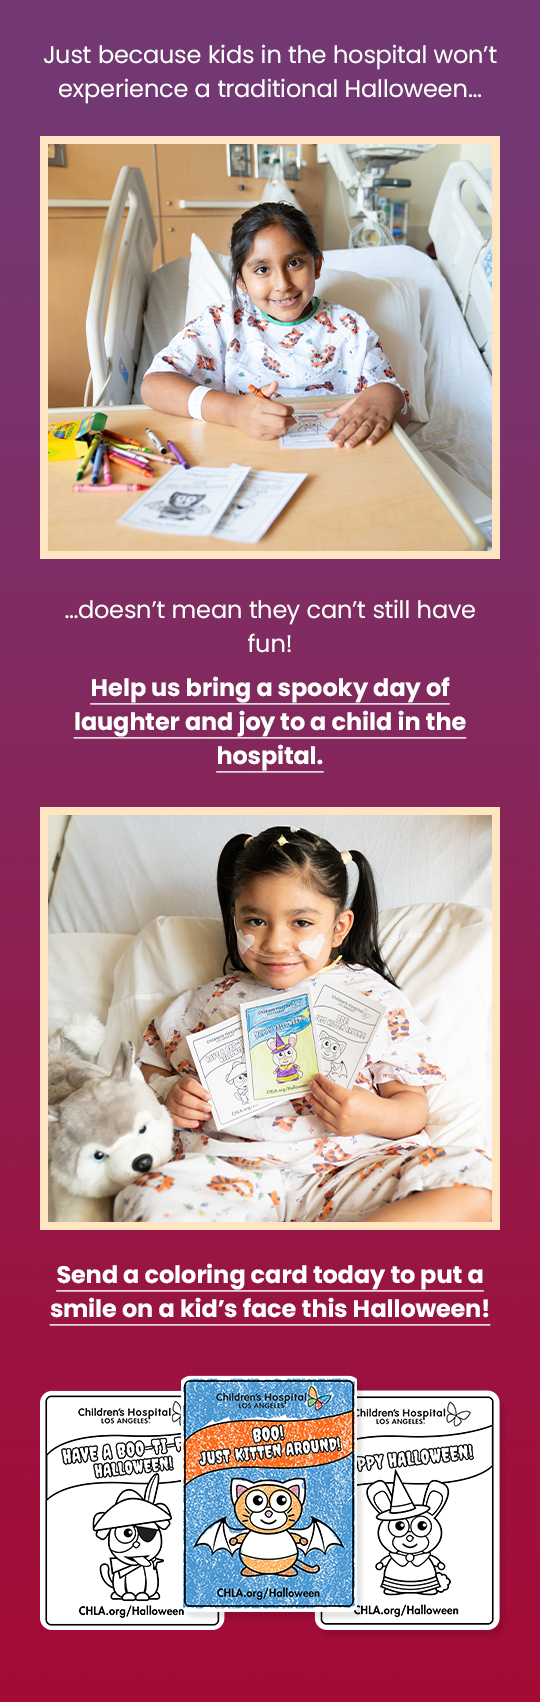 Just because kids in the hospital won’t experience a traditional Halloween...doesn't mean they can't still have fun! Help us bring a spooky day of laughter and joy to a child in the hospital. Send a coloring card today to put a smile on a kid's face this Halloween!